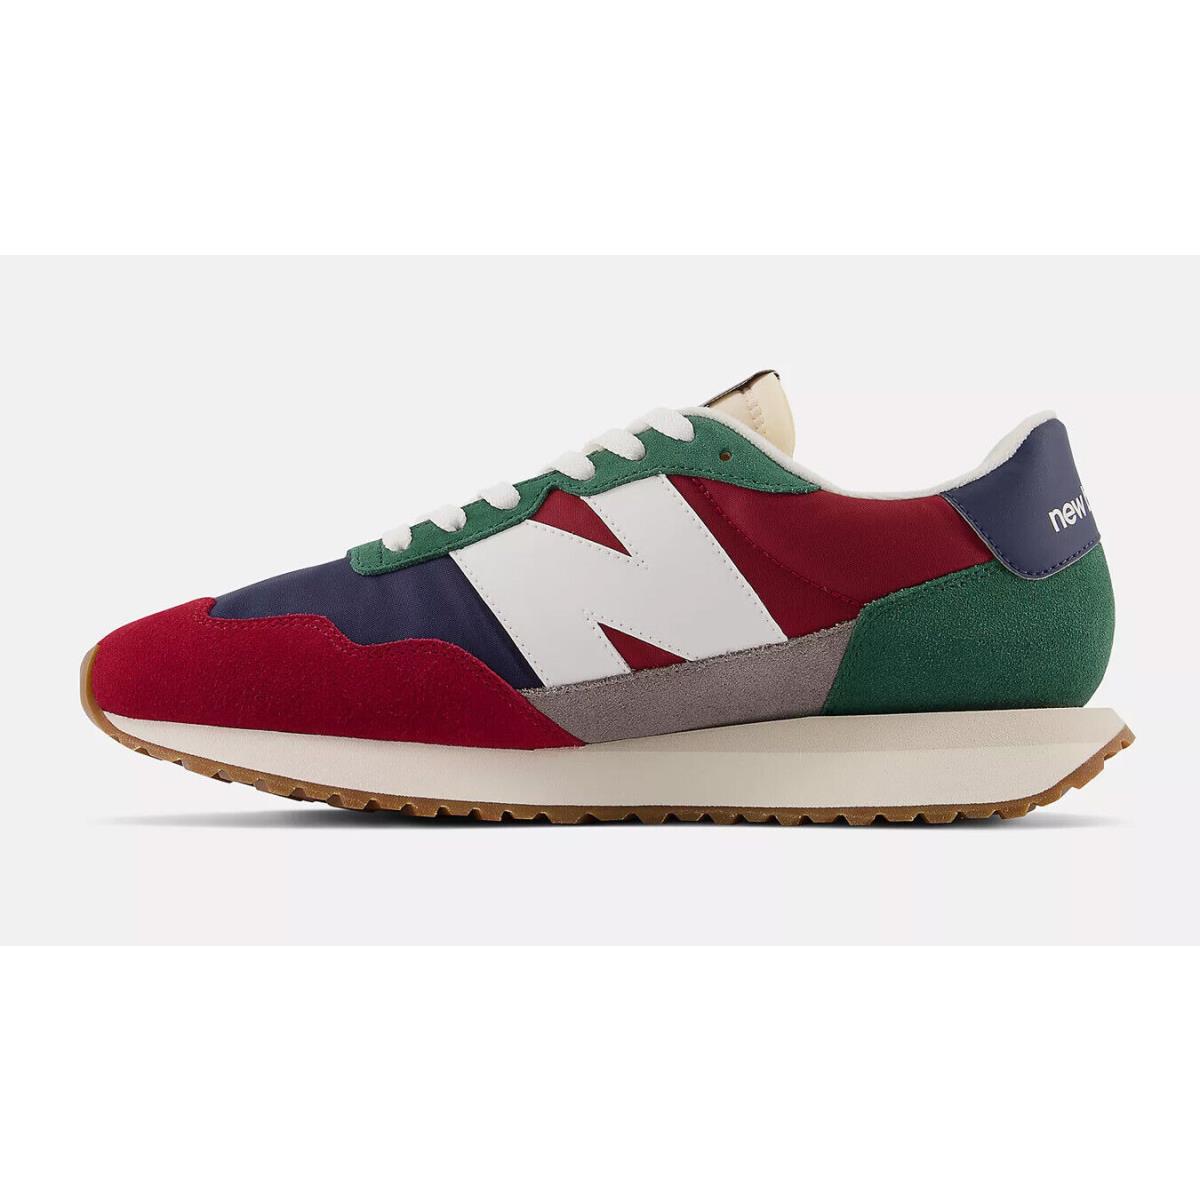 New Balance shoes  - Red/Green/Navy Blue 1